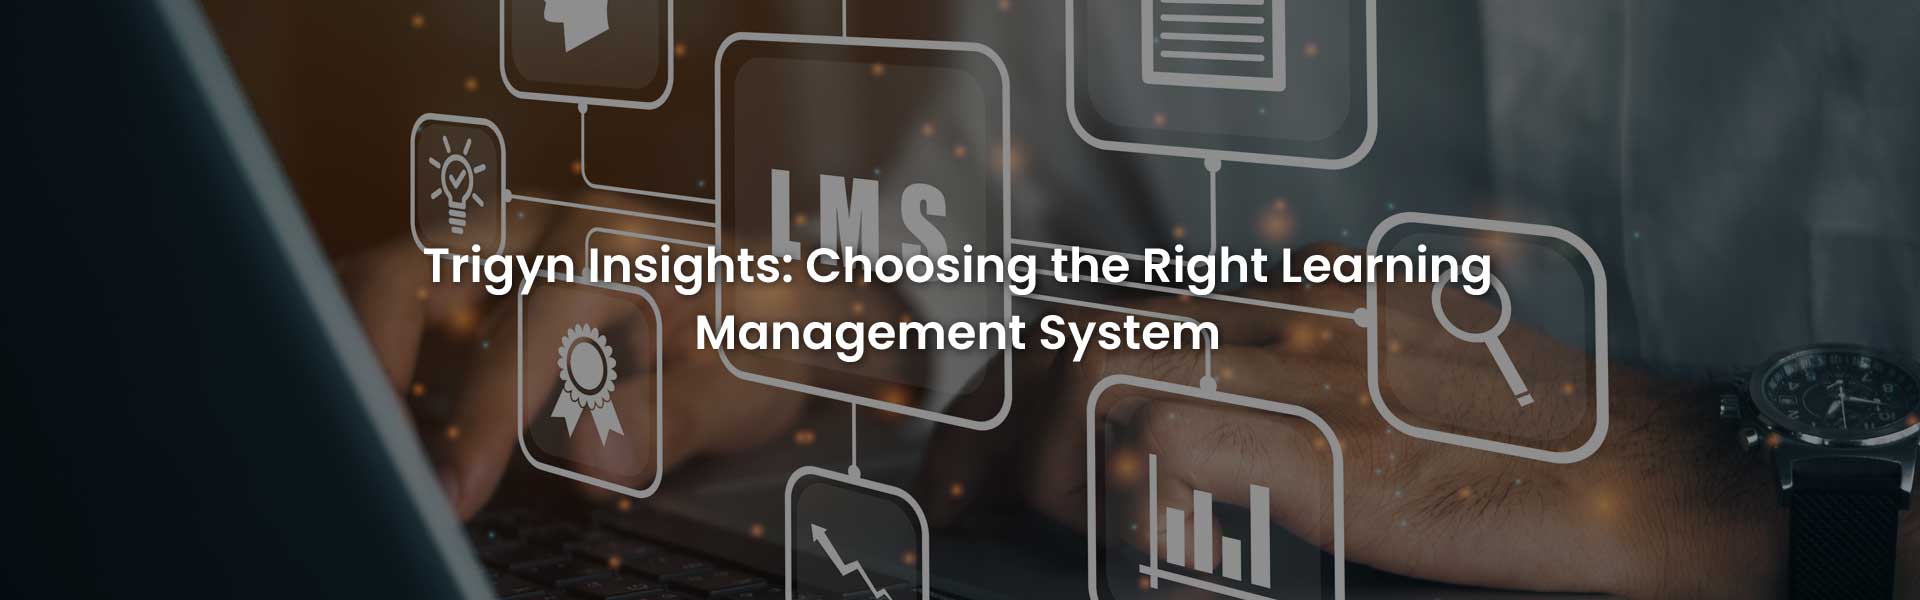 Right Learning Management System